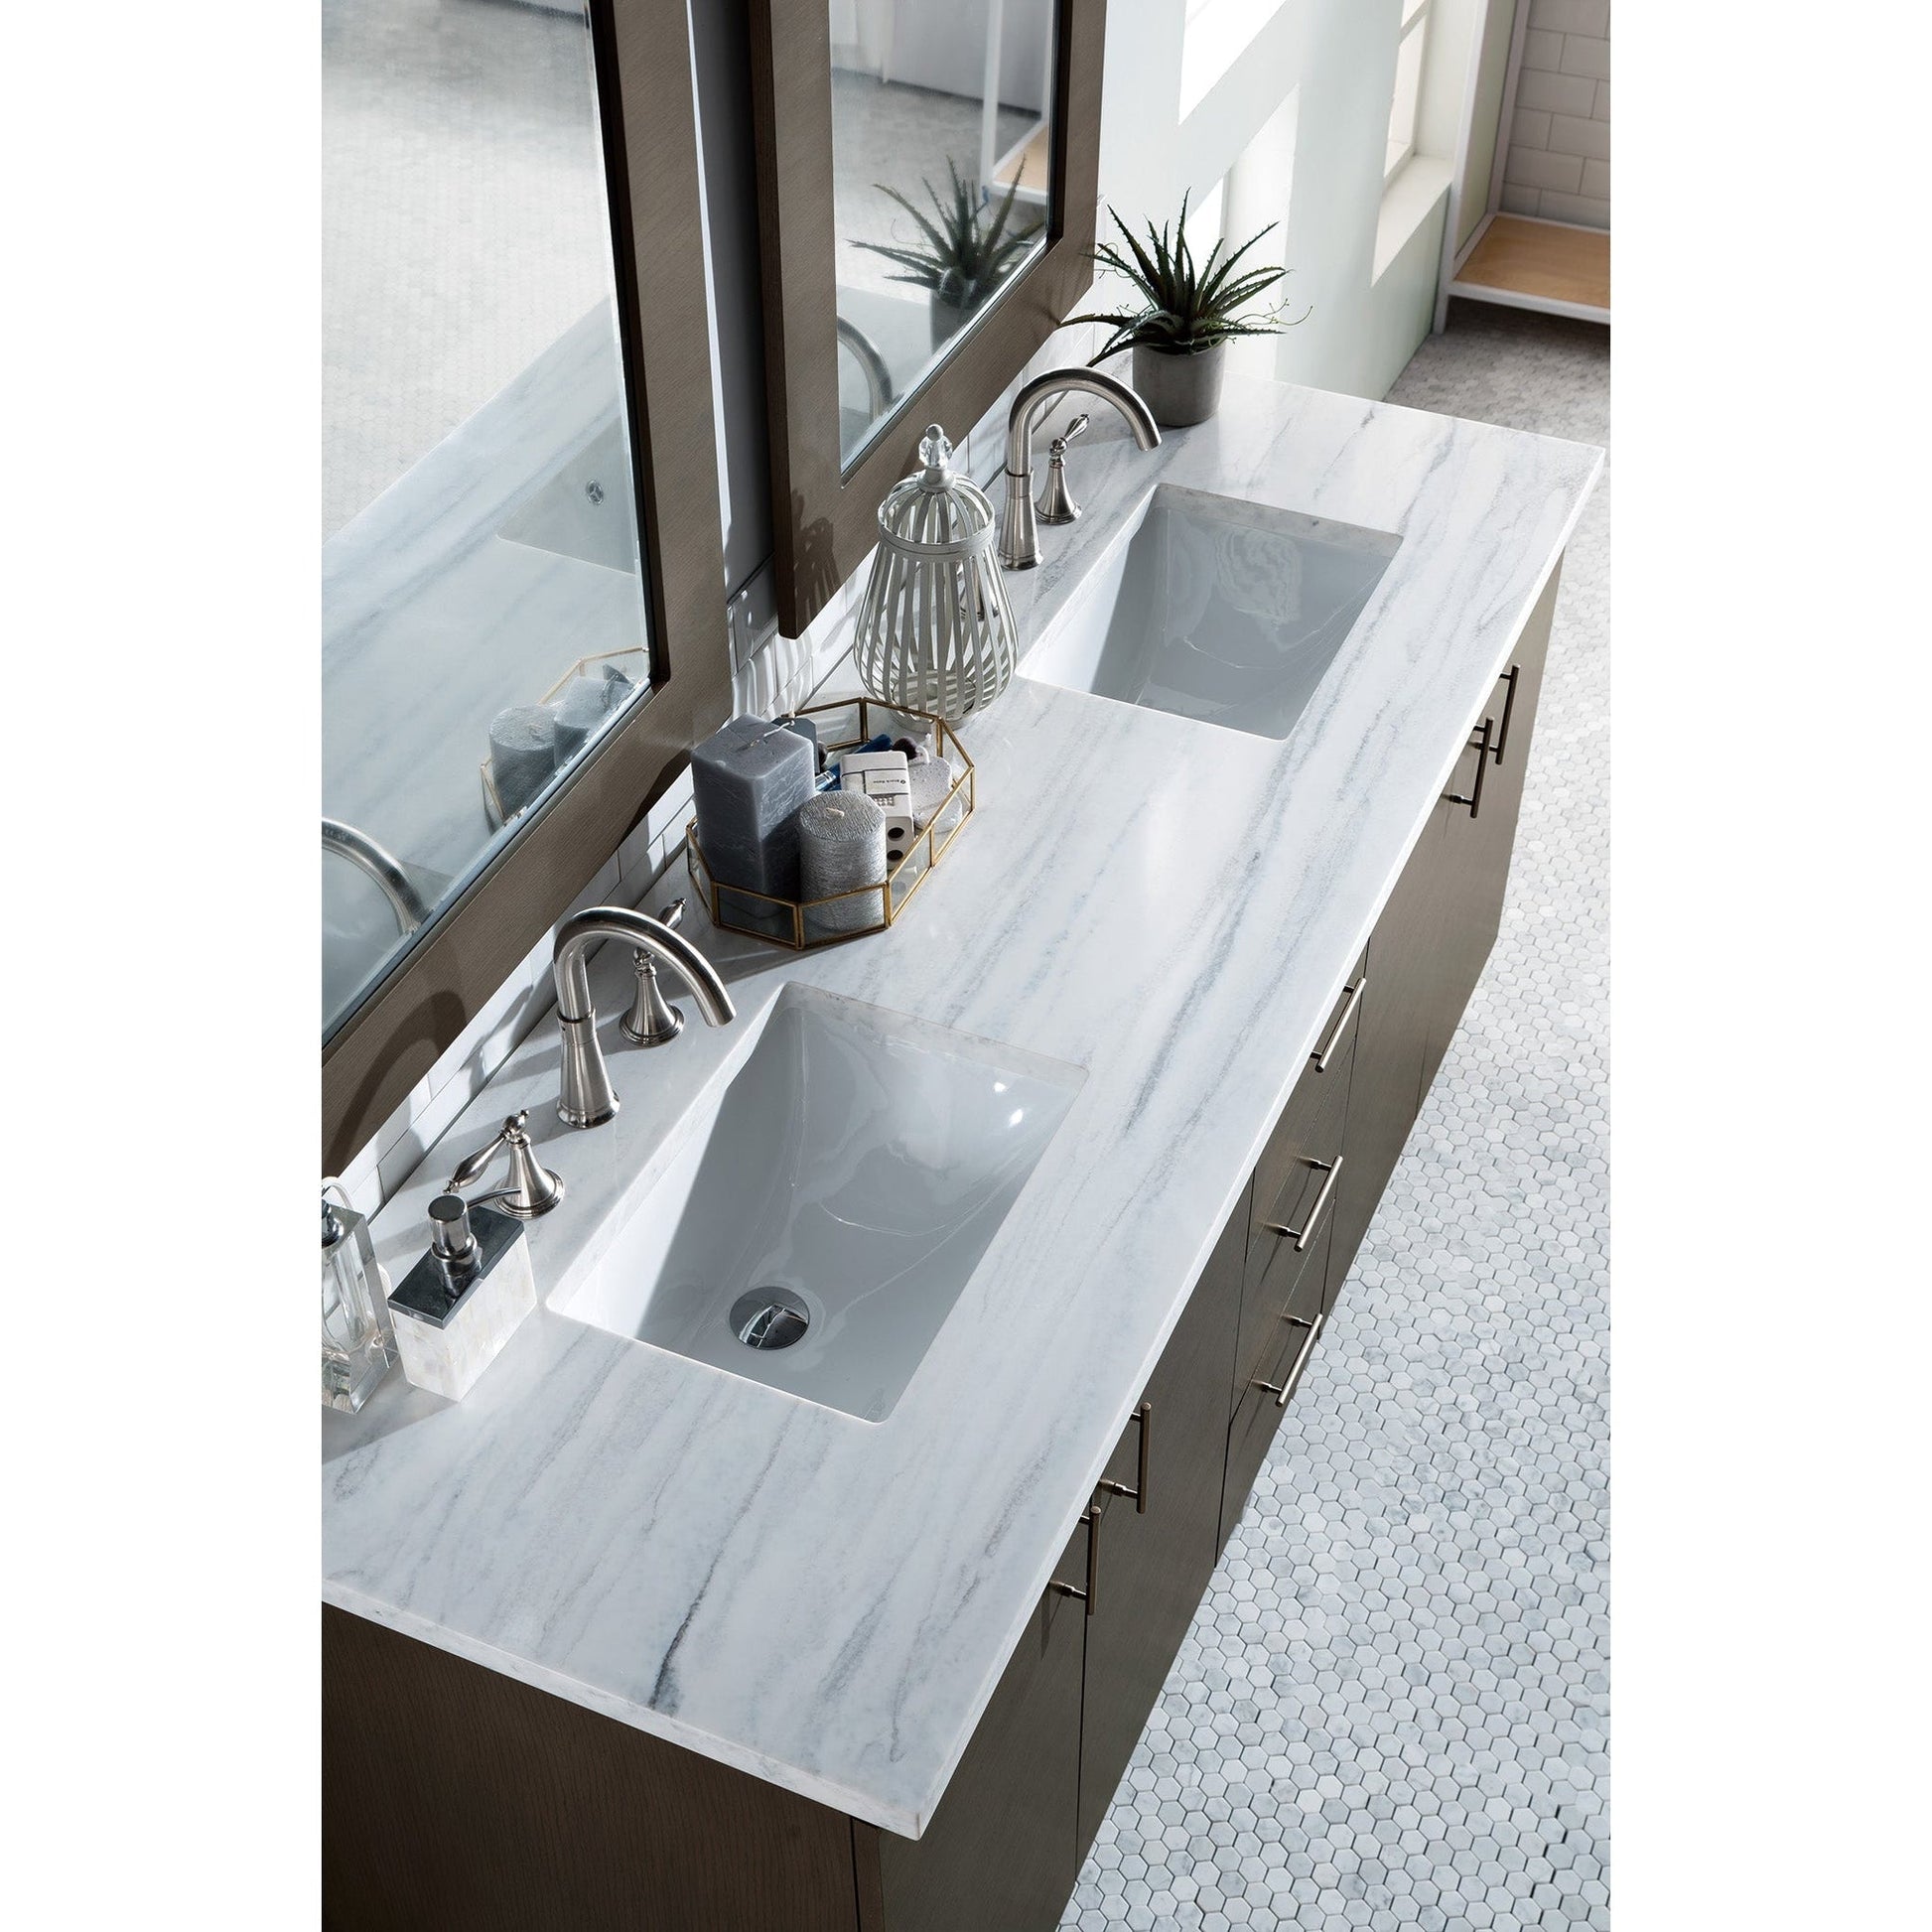 James Martin Metropolitan 72" Double Silver Oak Bathroom Vanity With 1" Arctic Fall Solid Surface Top and Rectangular Ceramic Sink